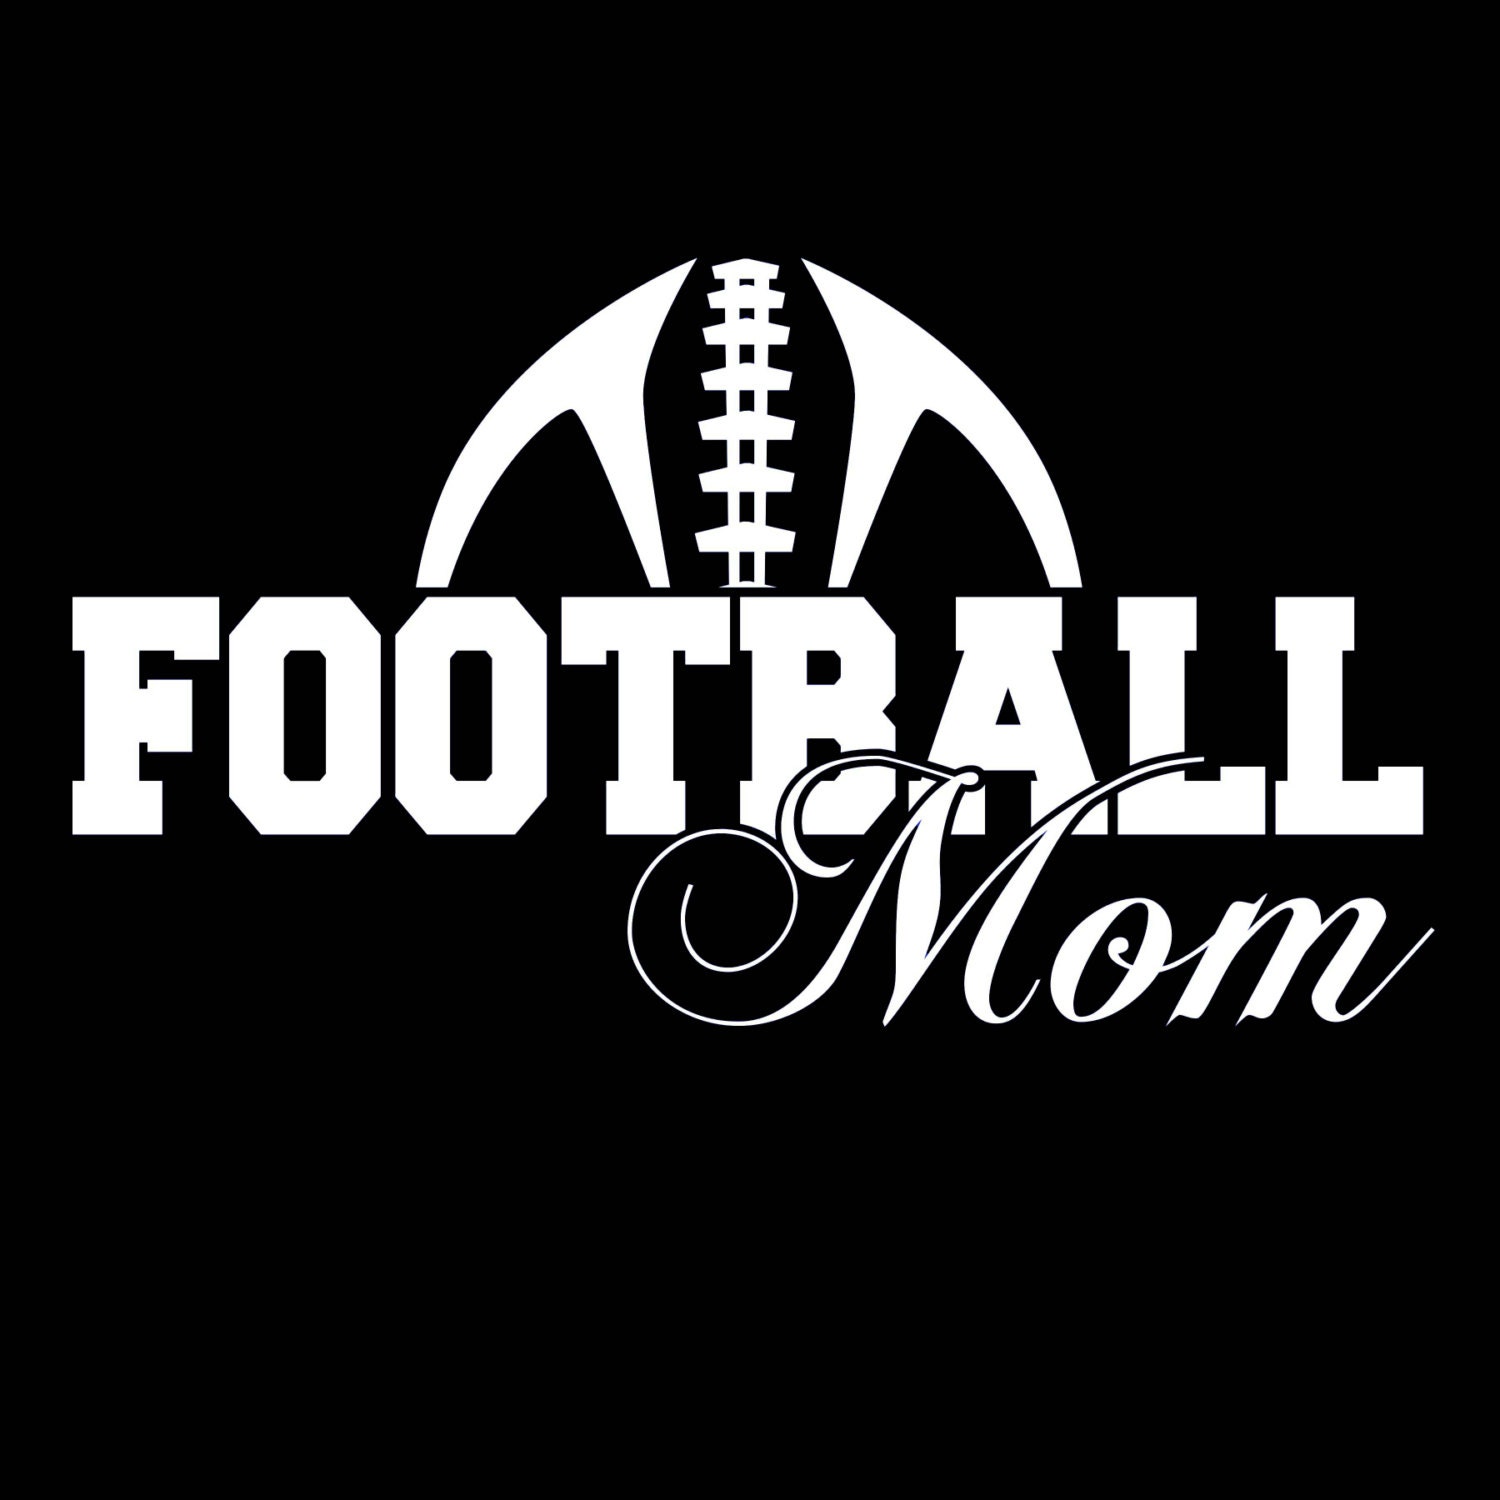 Download Football Mom Shirt Black with Saying Funny Cool Free